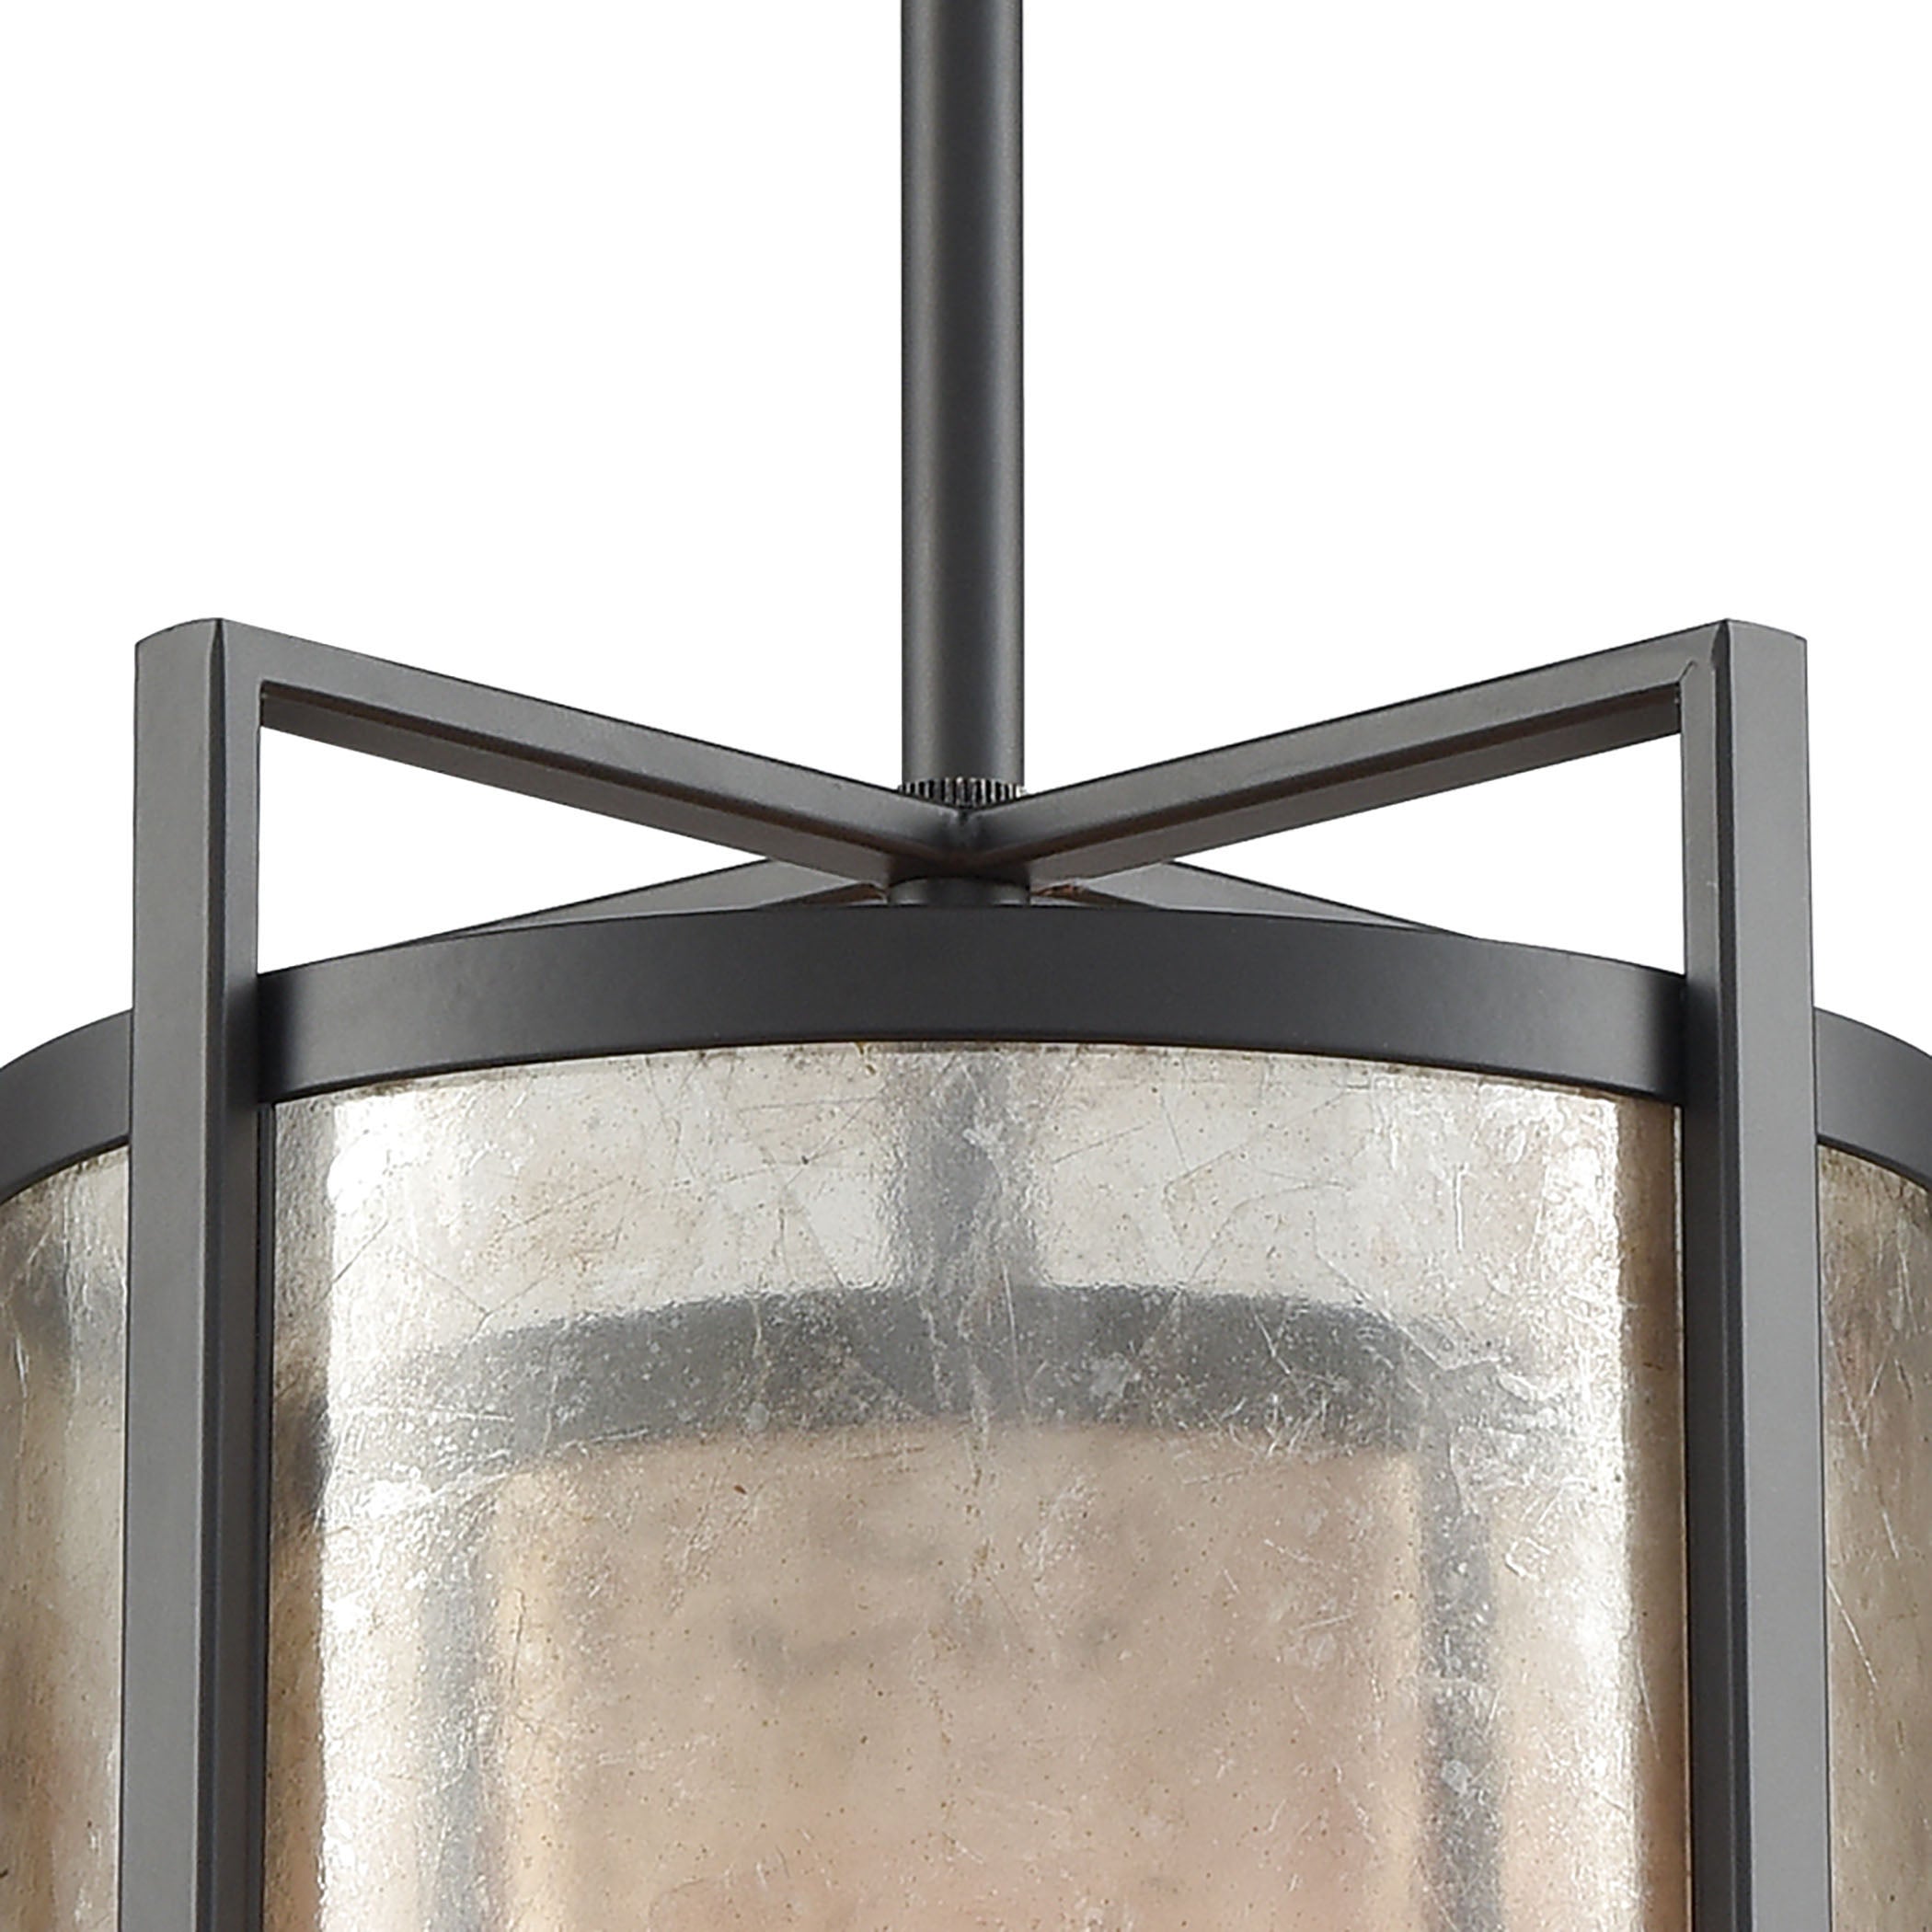 ELK Lighting 16191/1 Stasis 1-Light Mini Pendant in Oil Rubbed Bronze with Tan and Clear Mica Shade